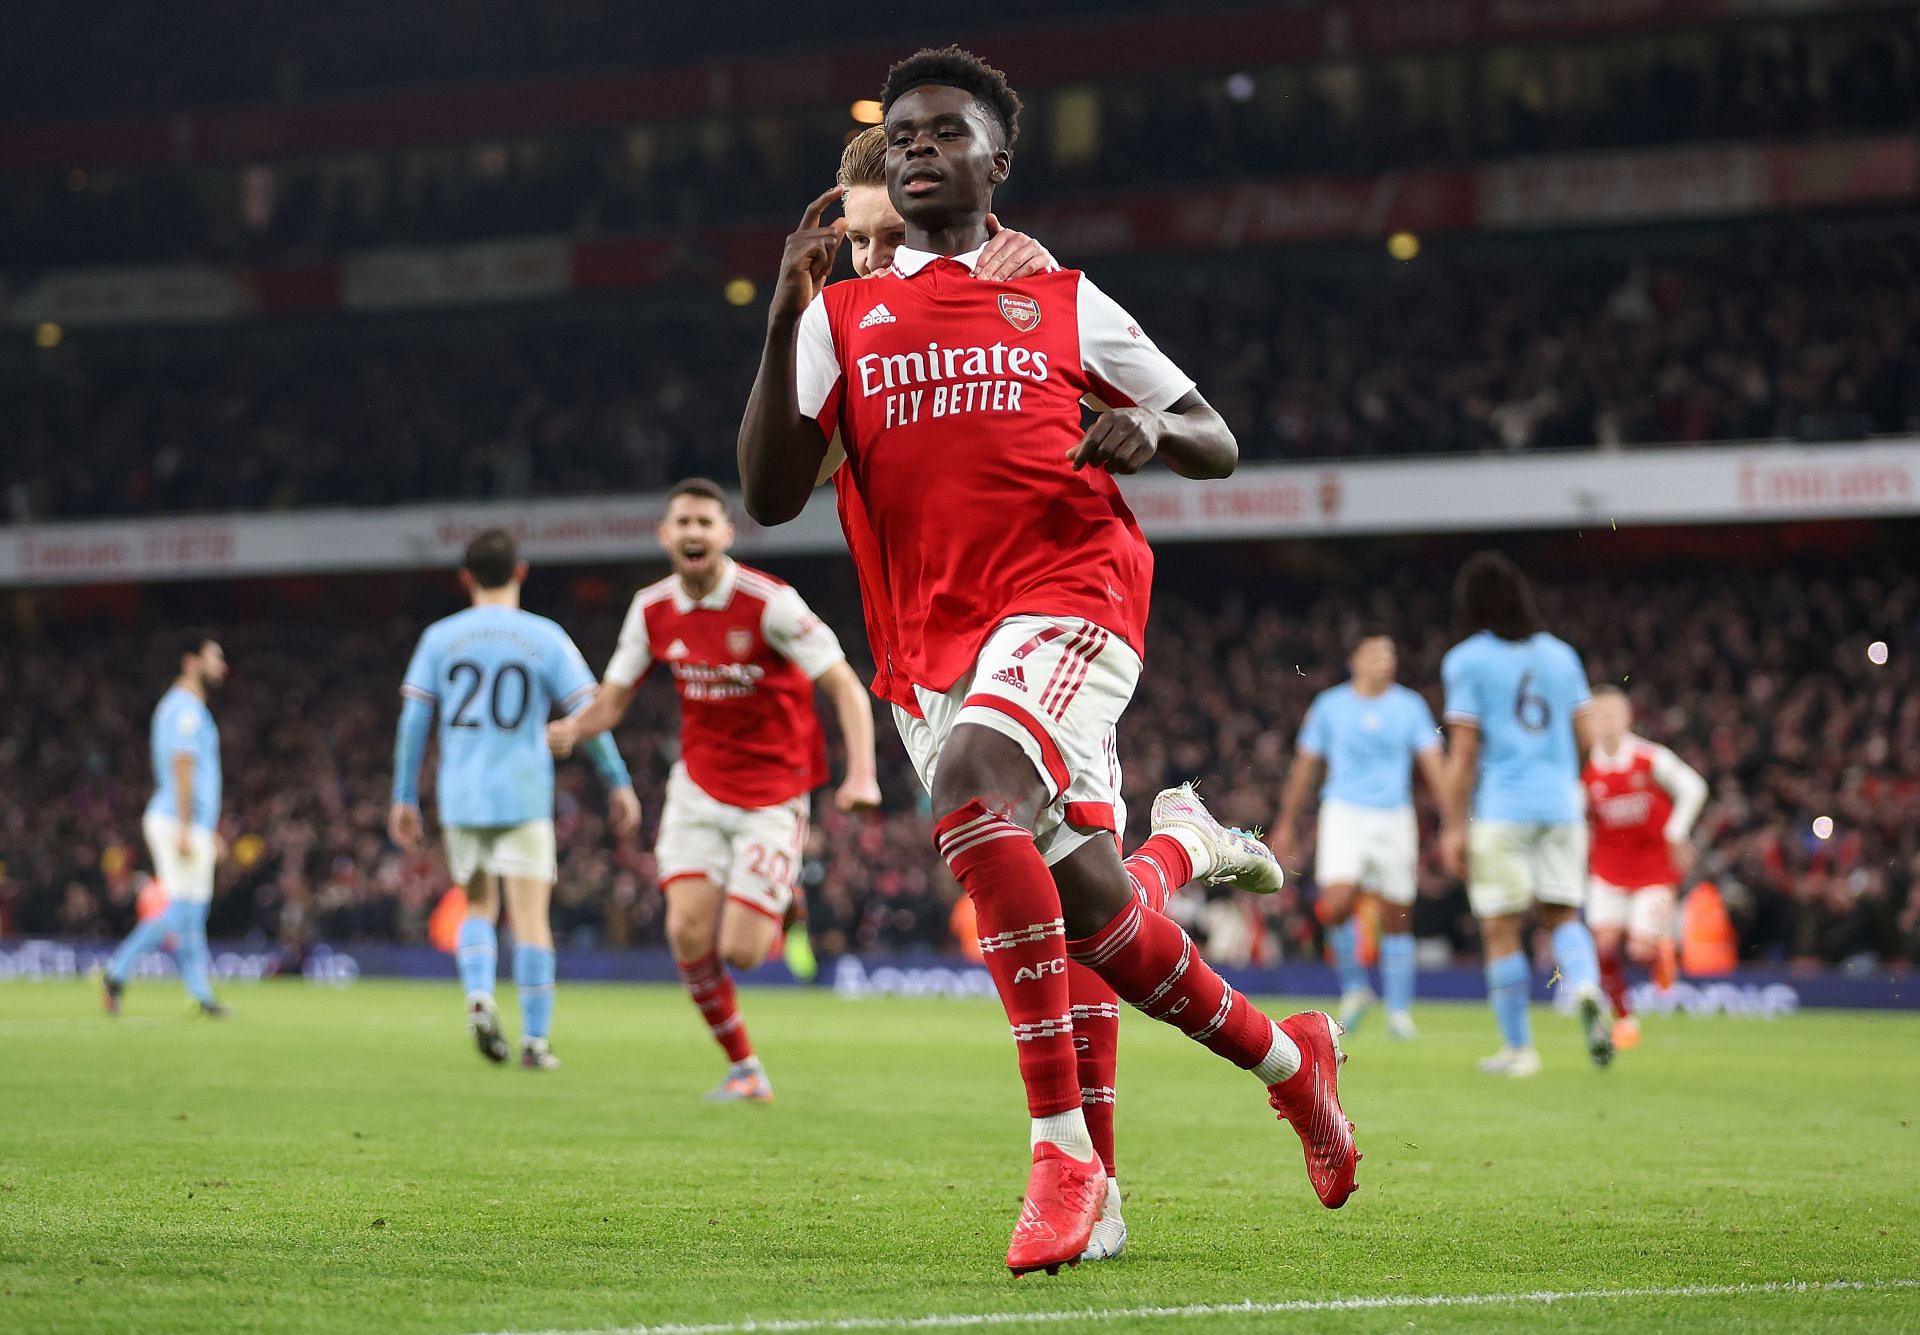 Bukayo Saka is likely to extend his stay at the Emirates.